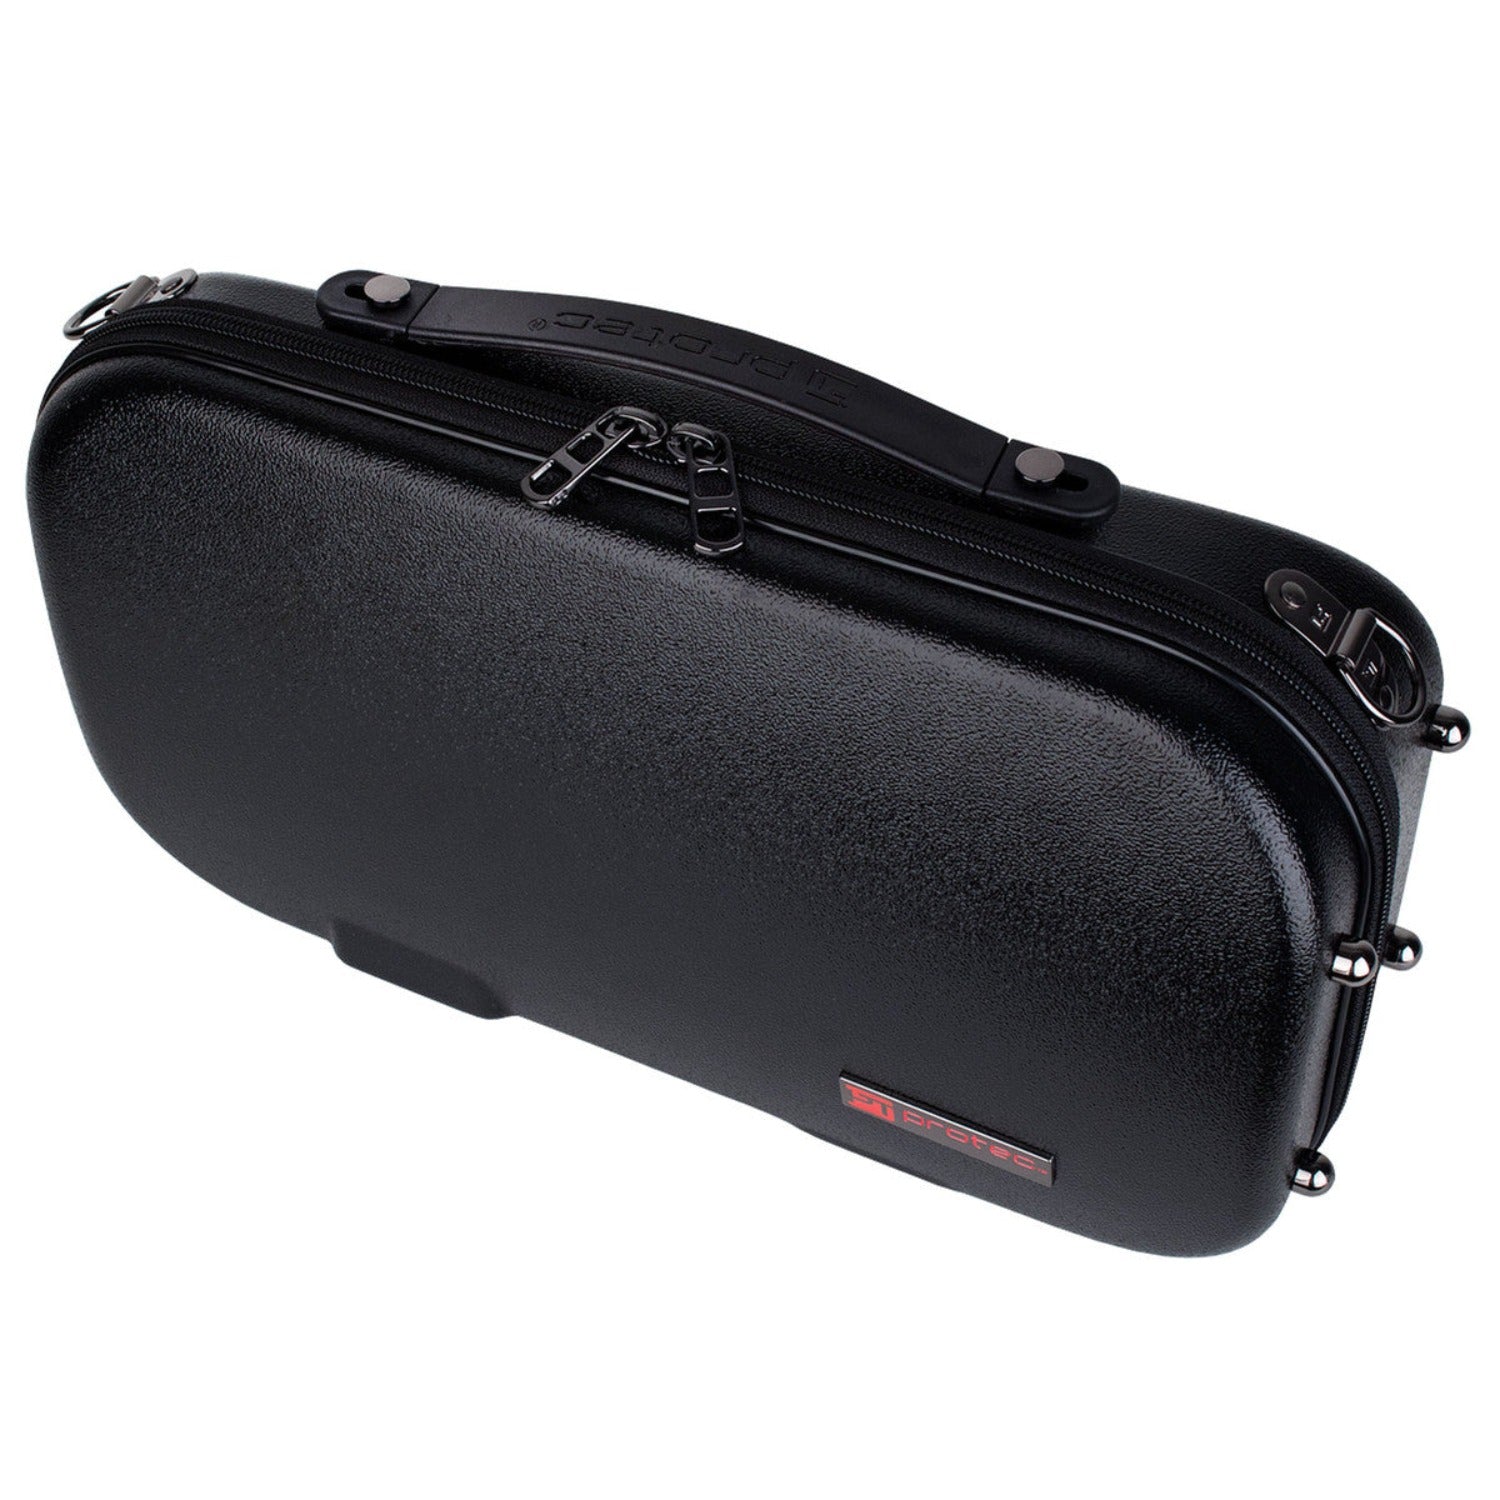 top down angled view of Protec Microzip clarinet case, closed, showing handle, zipper, and strap fastening ring